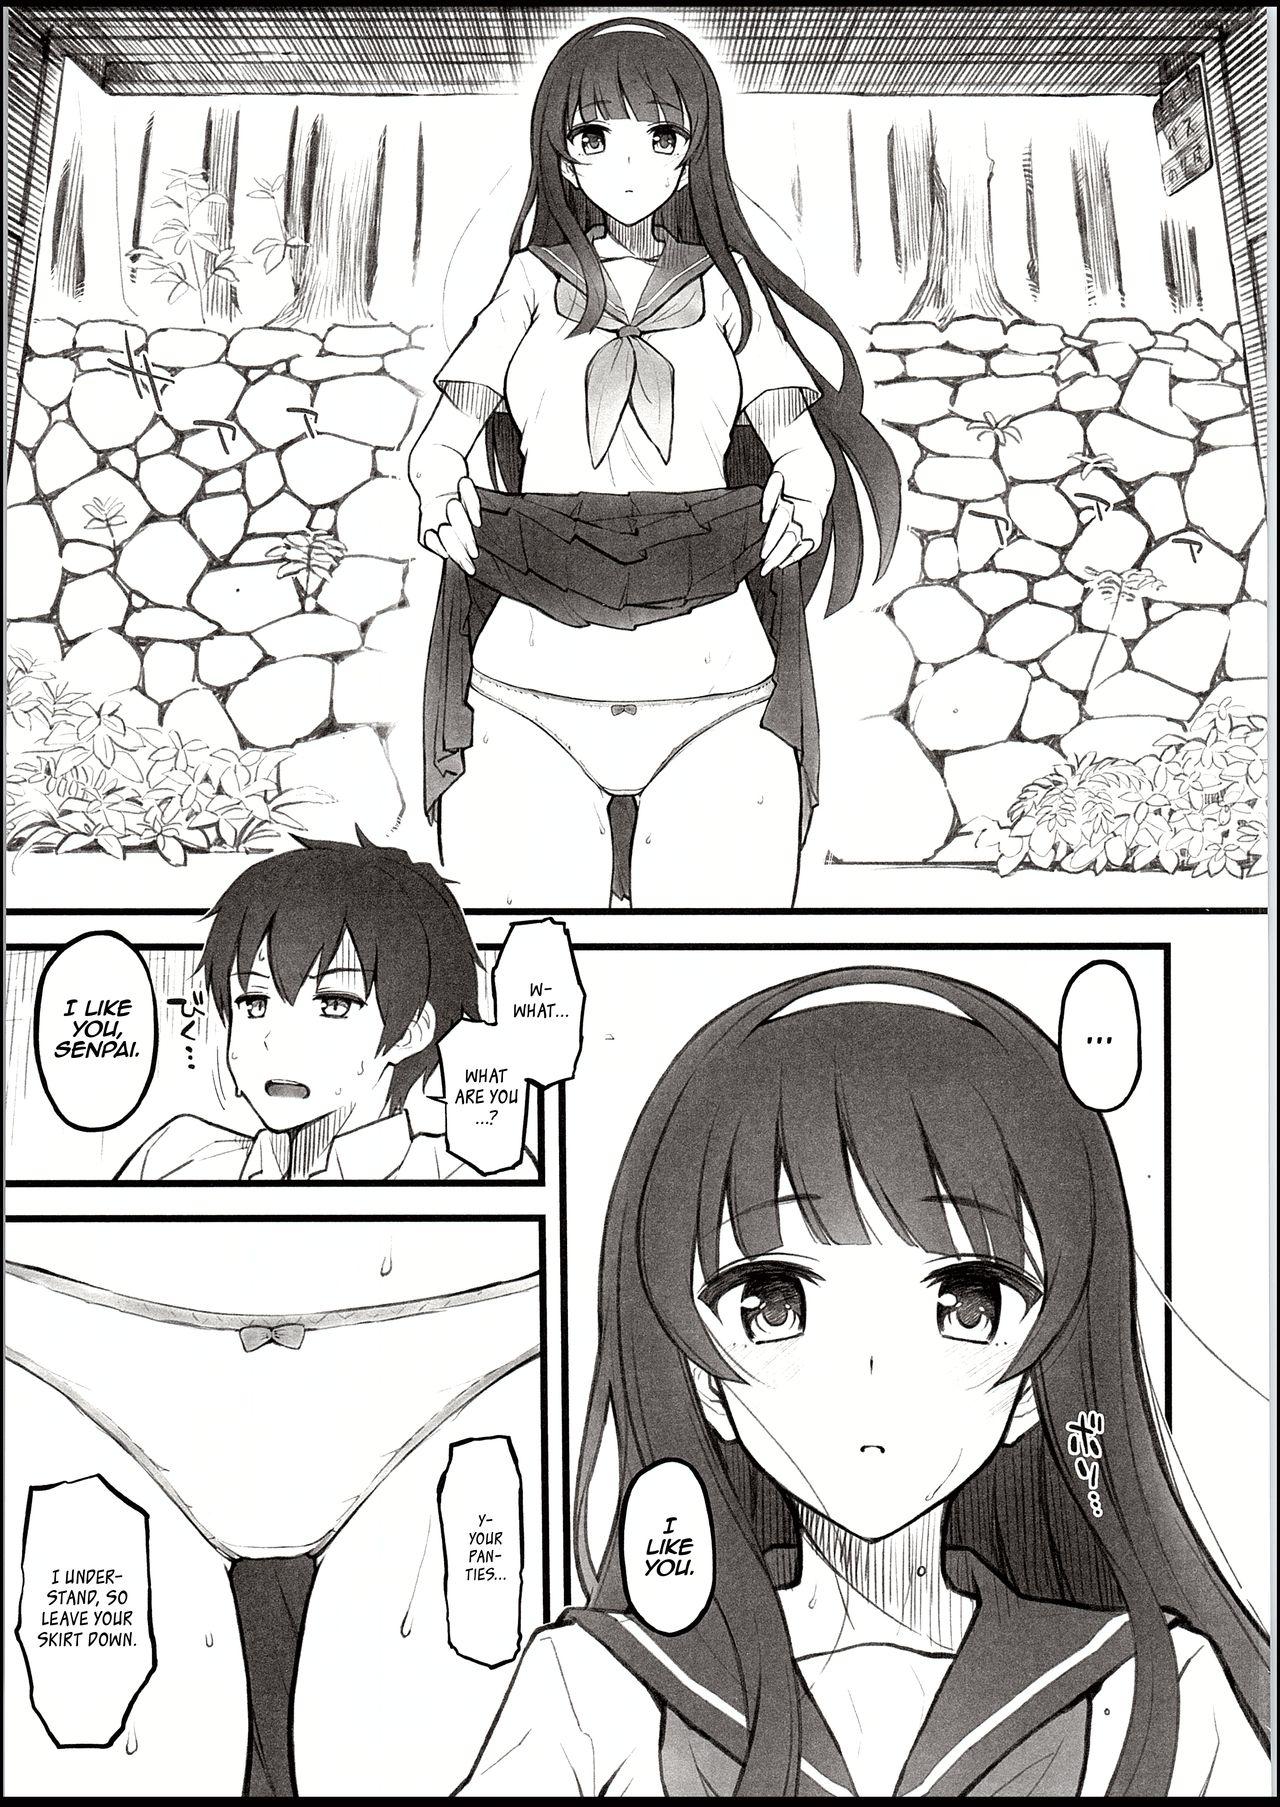 Perfect Tits Natsu no Hi, Kouhai to, Bus-tei de. | On a Summer Day, with My Kouhai, at the Bus Stop. - Original Pussylick - Page 6